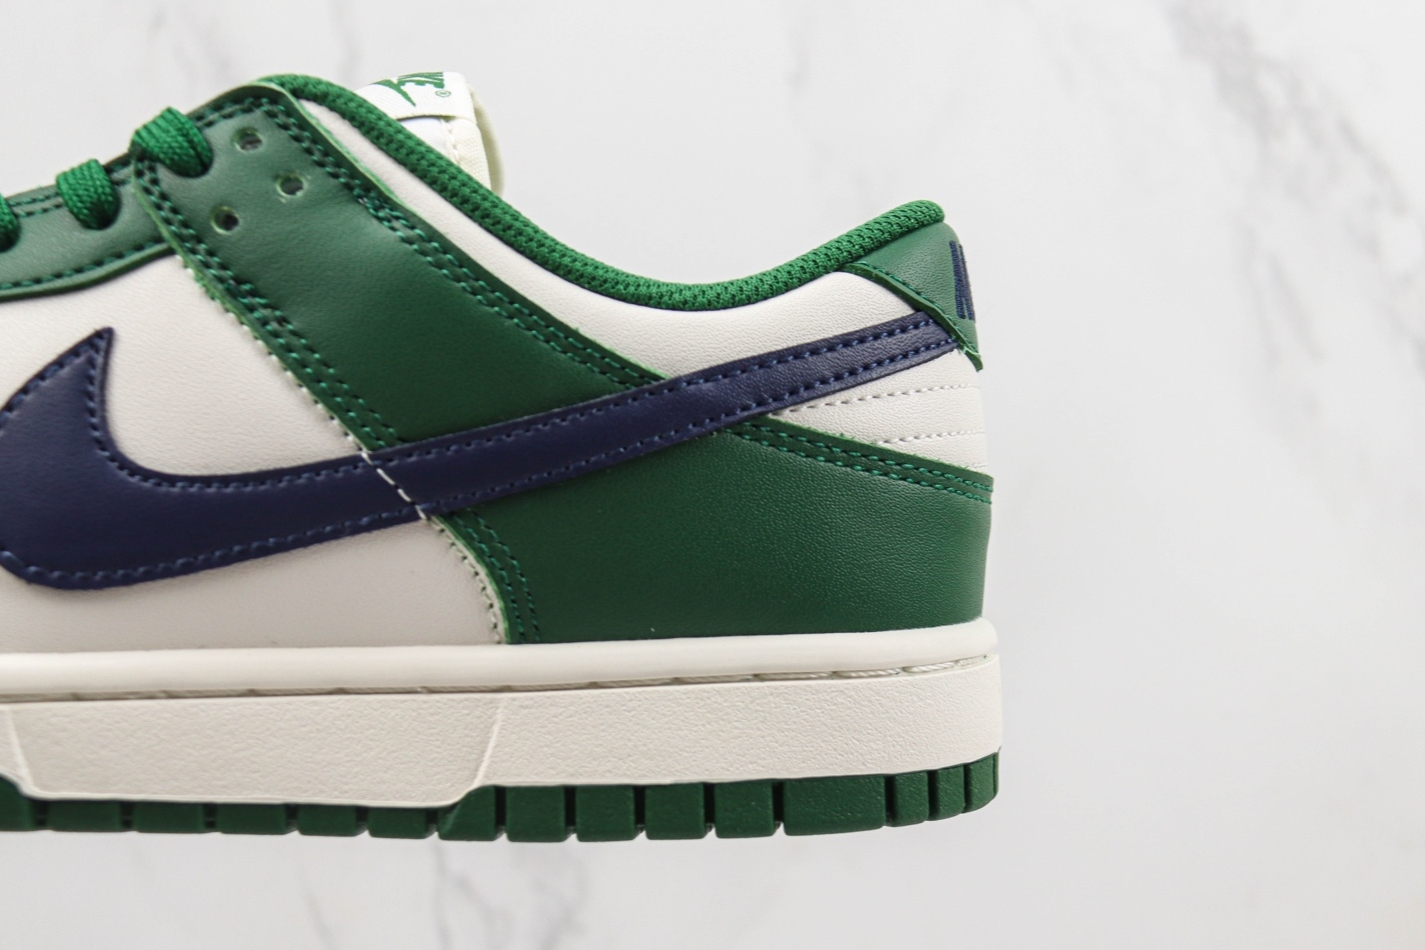 Nike Dunk Low 'Gorge Green' DD1503-300 - Trendy Sneakers for Style Enthusiasts